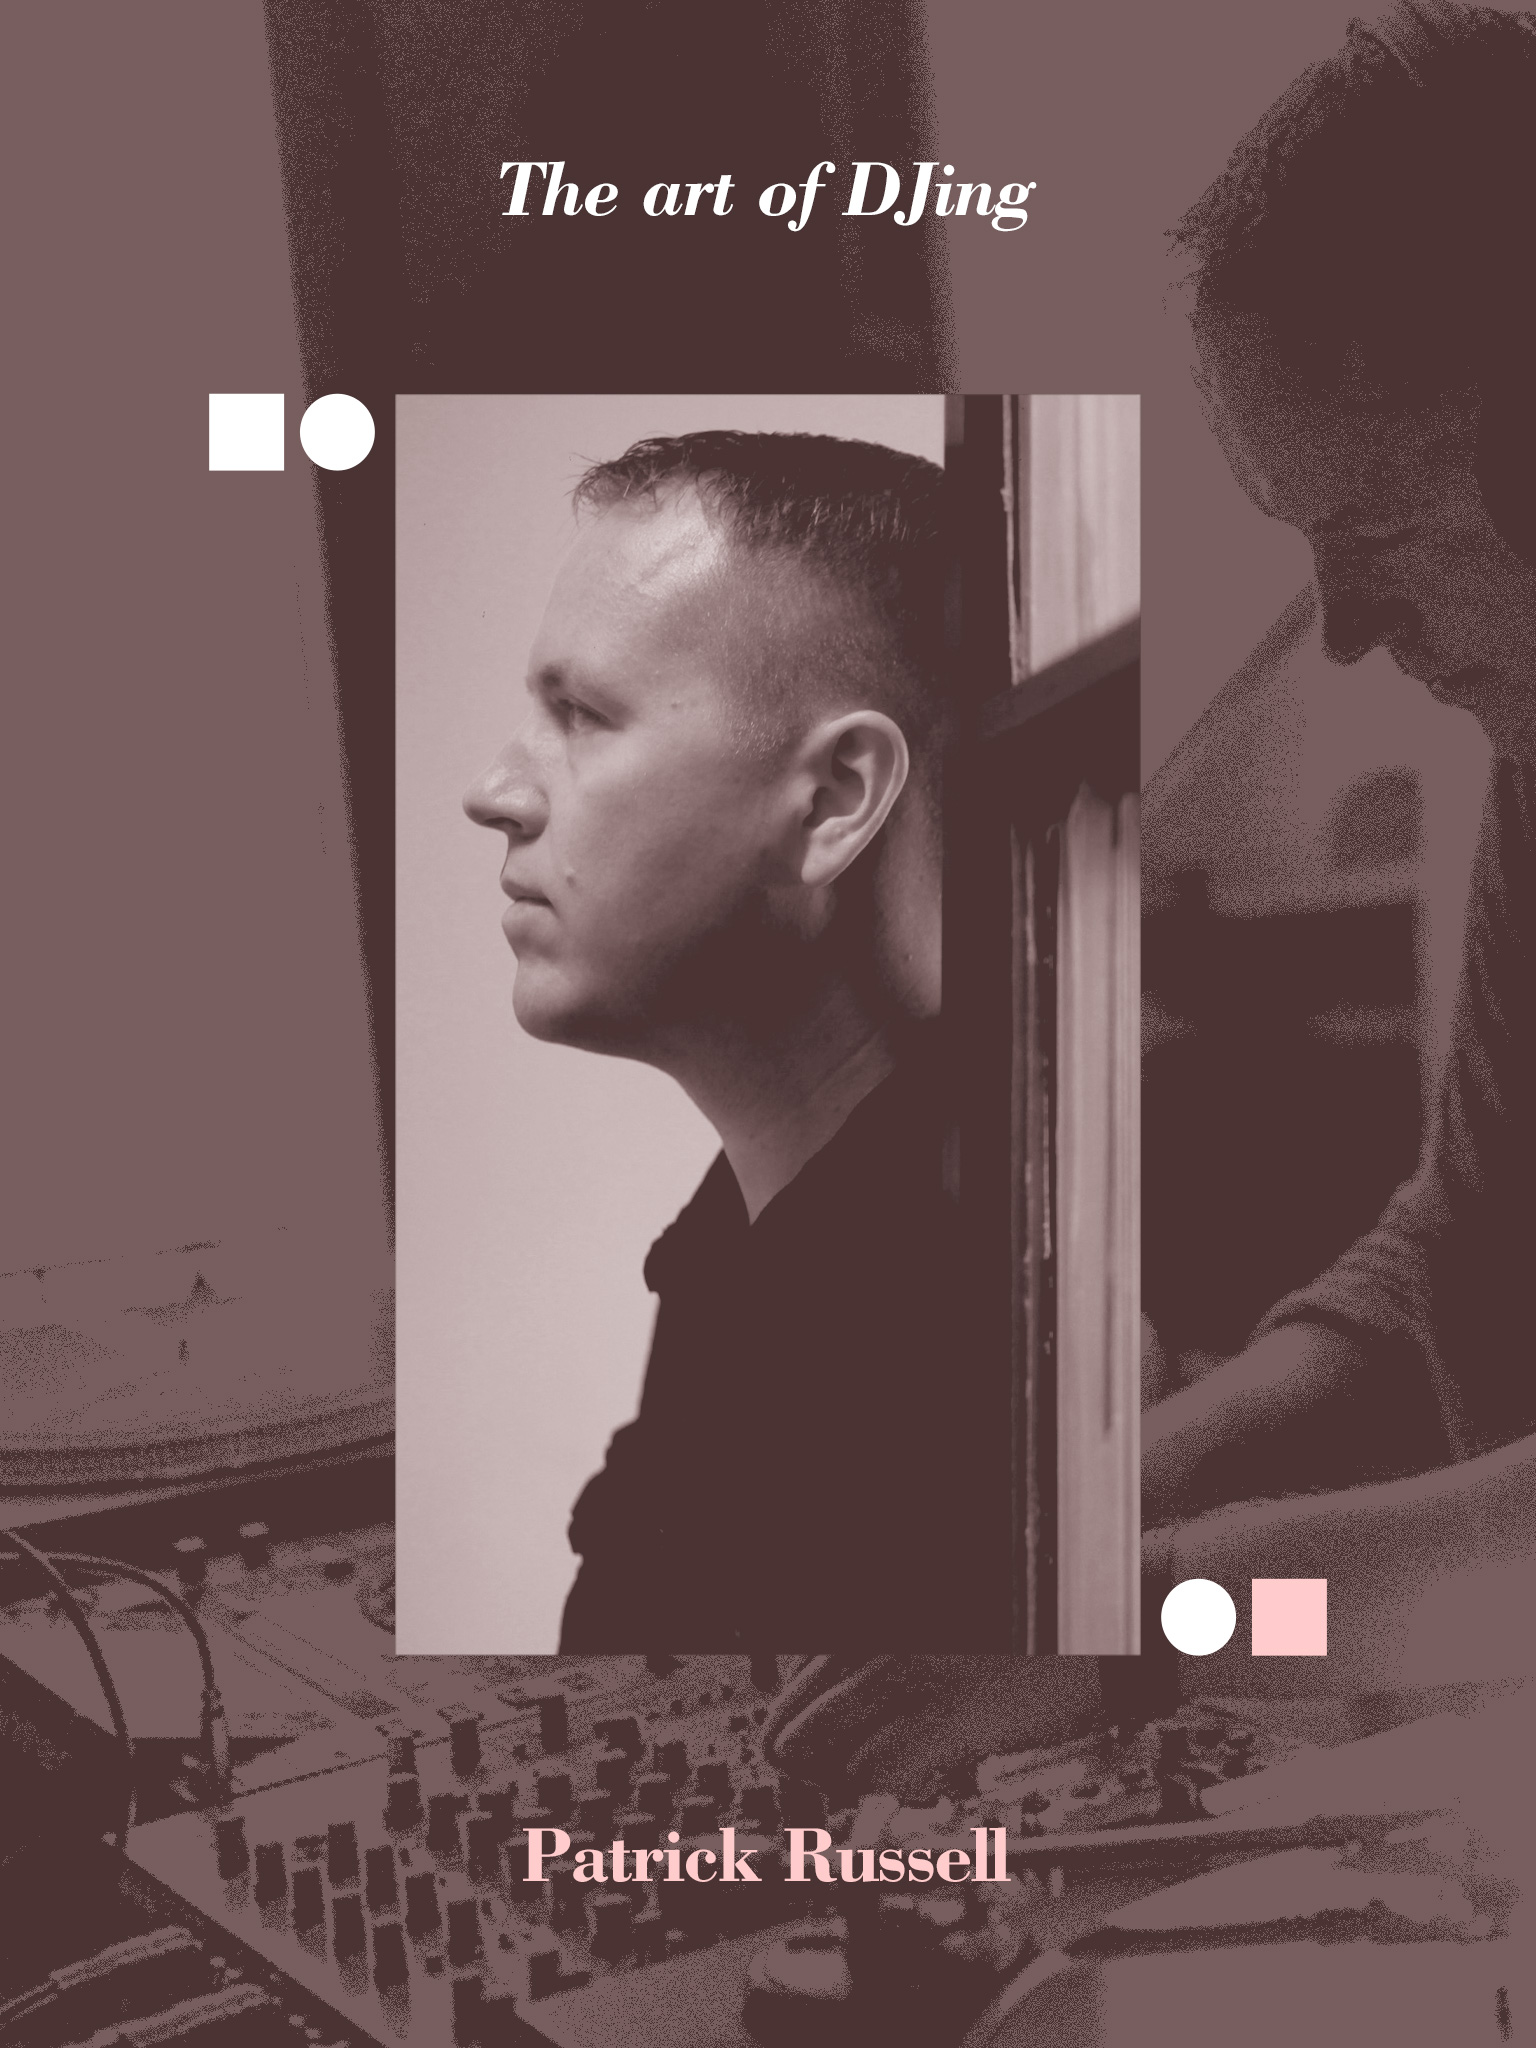 The art of DJing: Patrick Russell